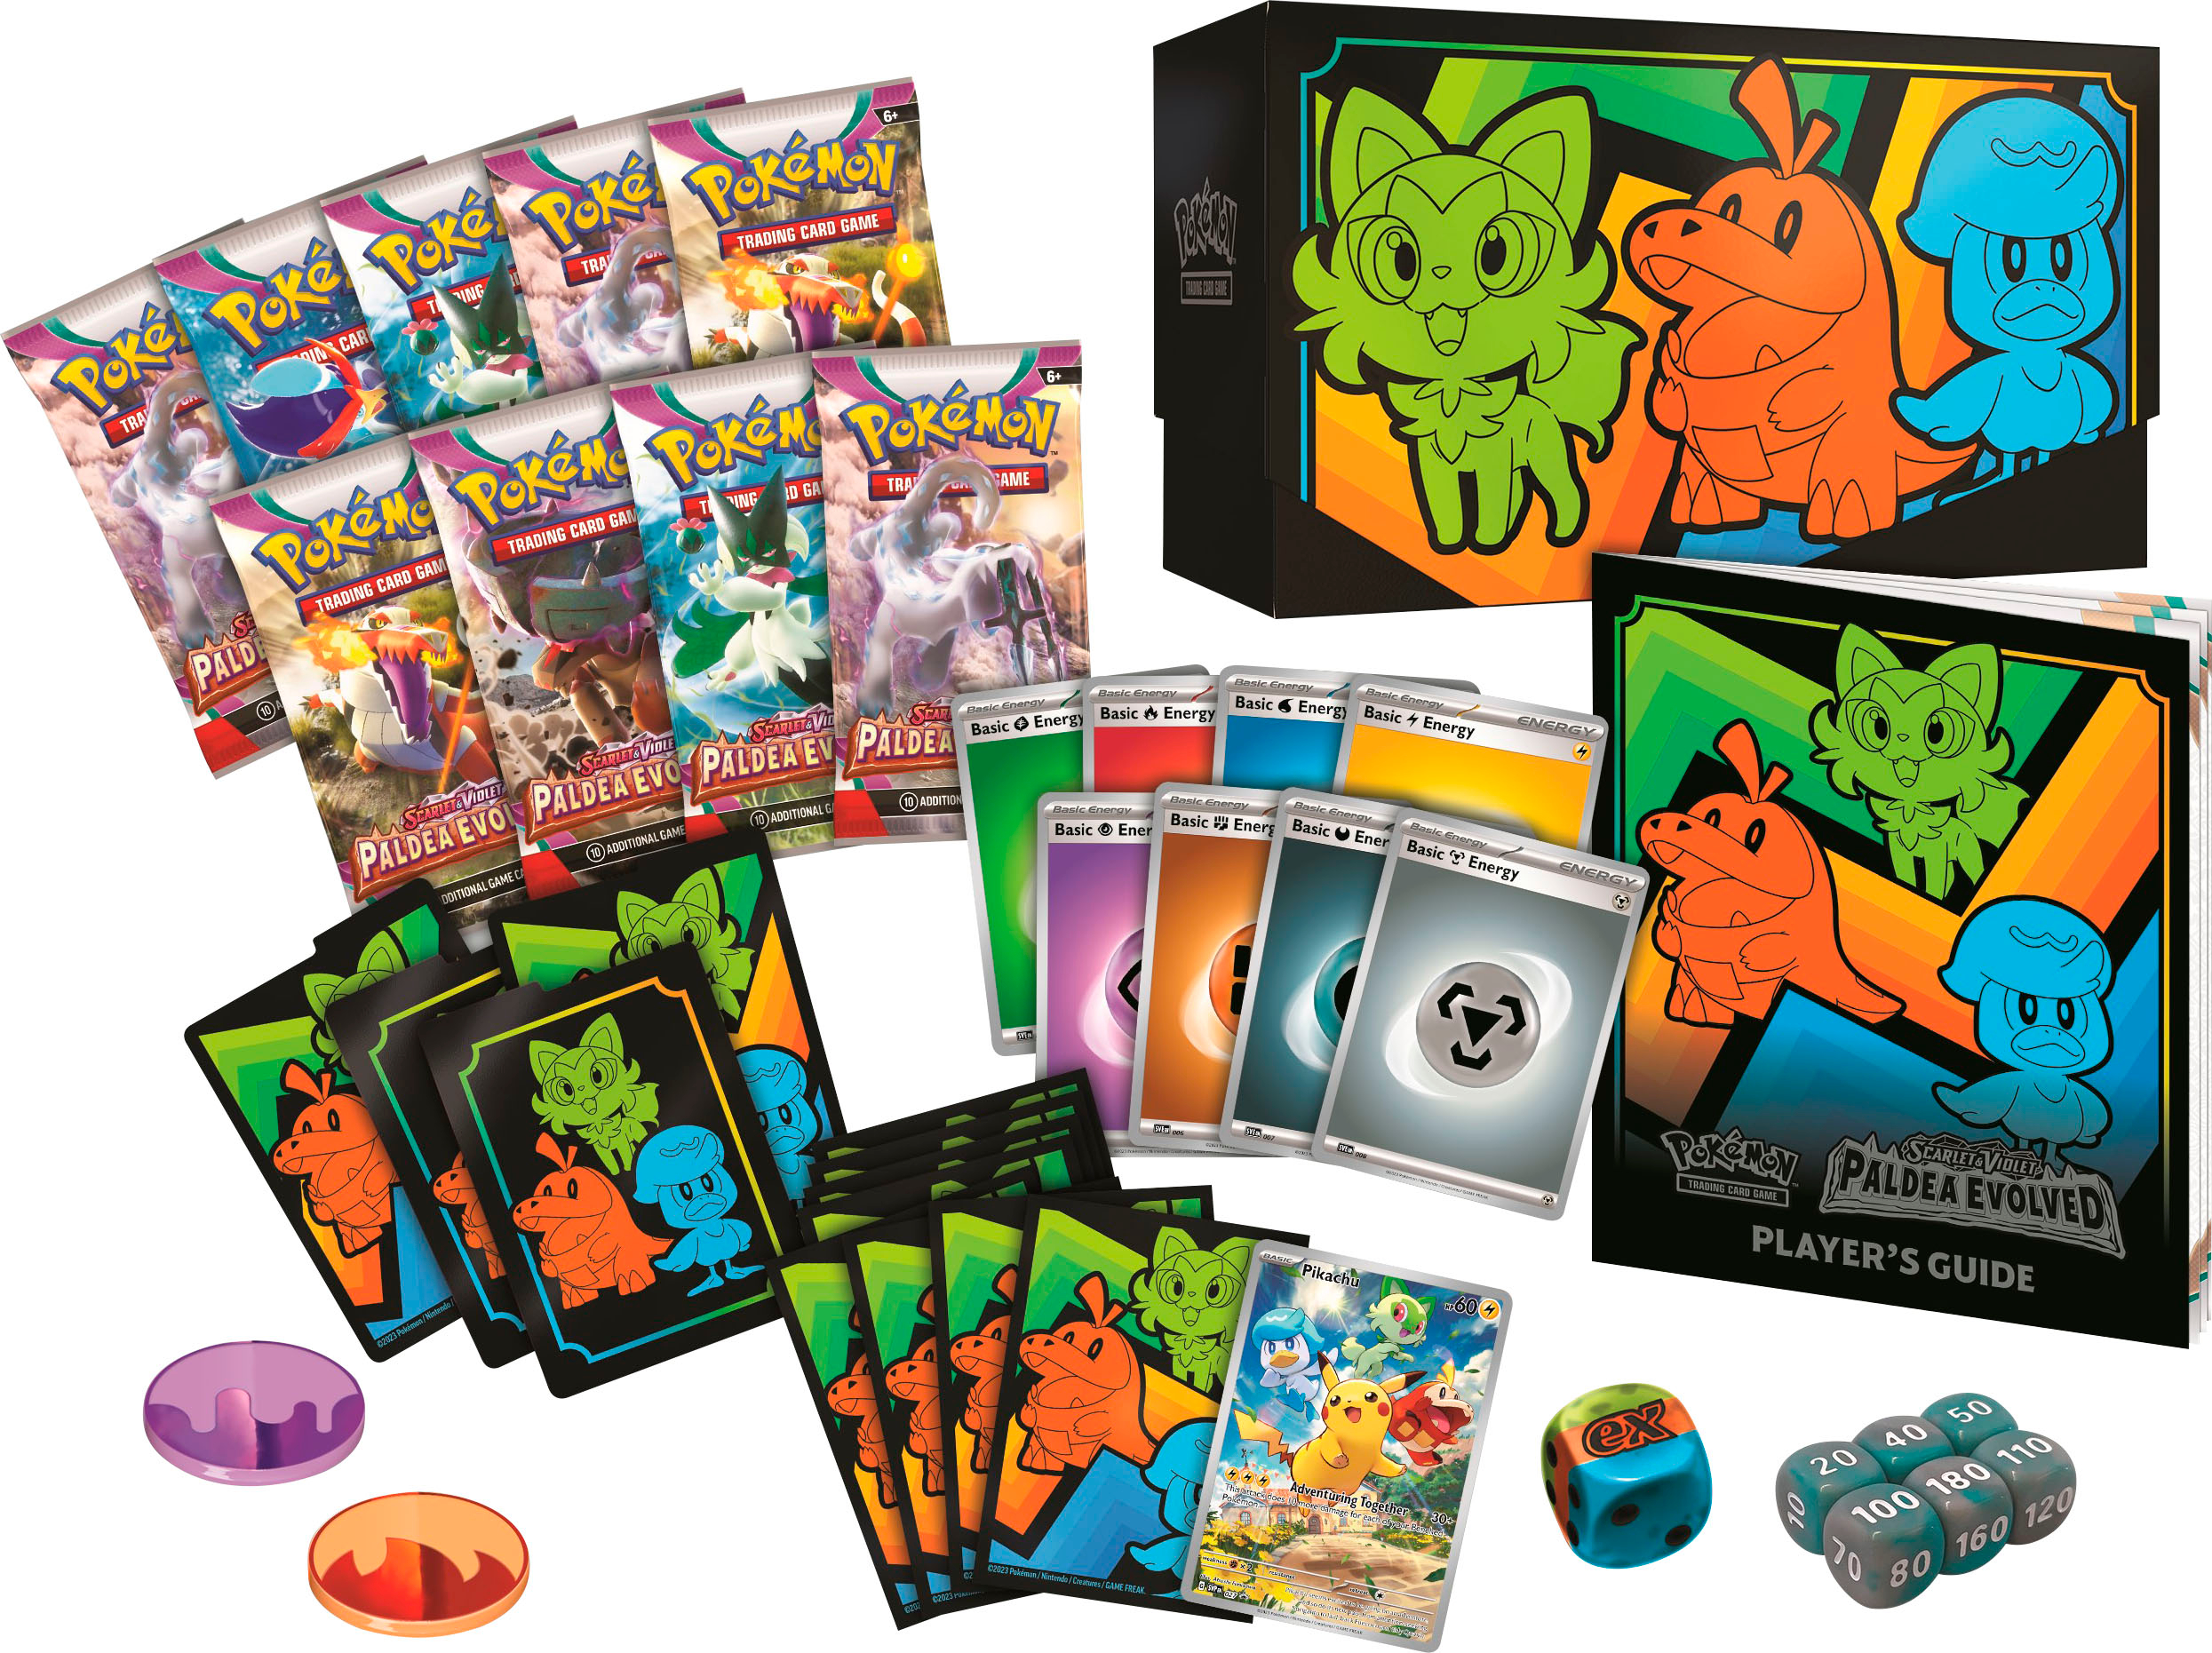 A Little mini review of the new 151 Elite Trainer Box! Lots of